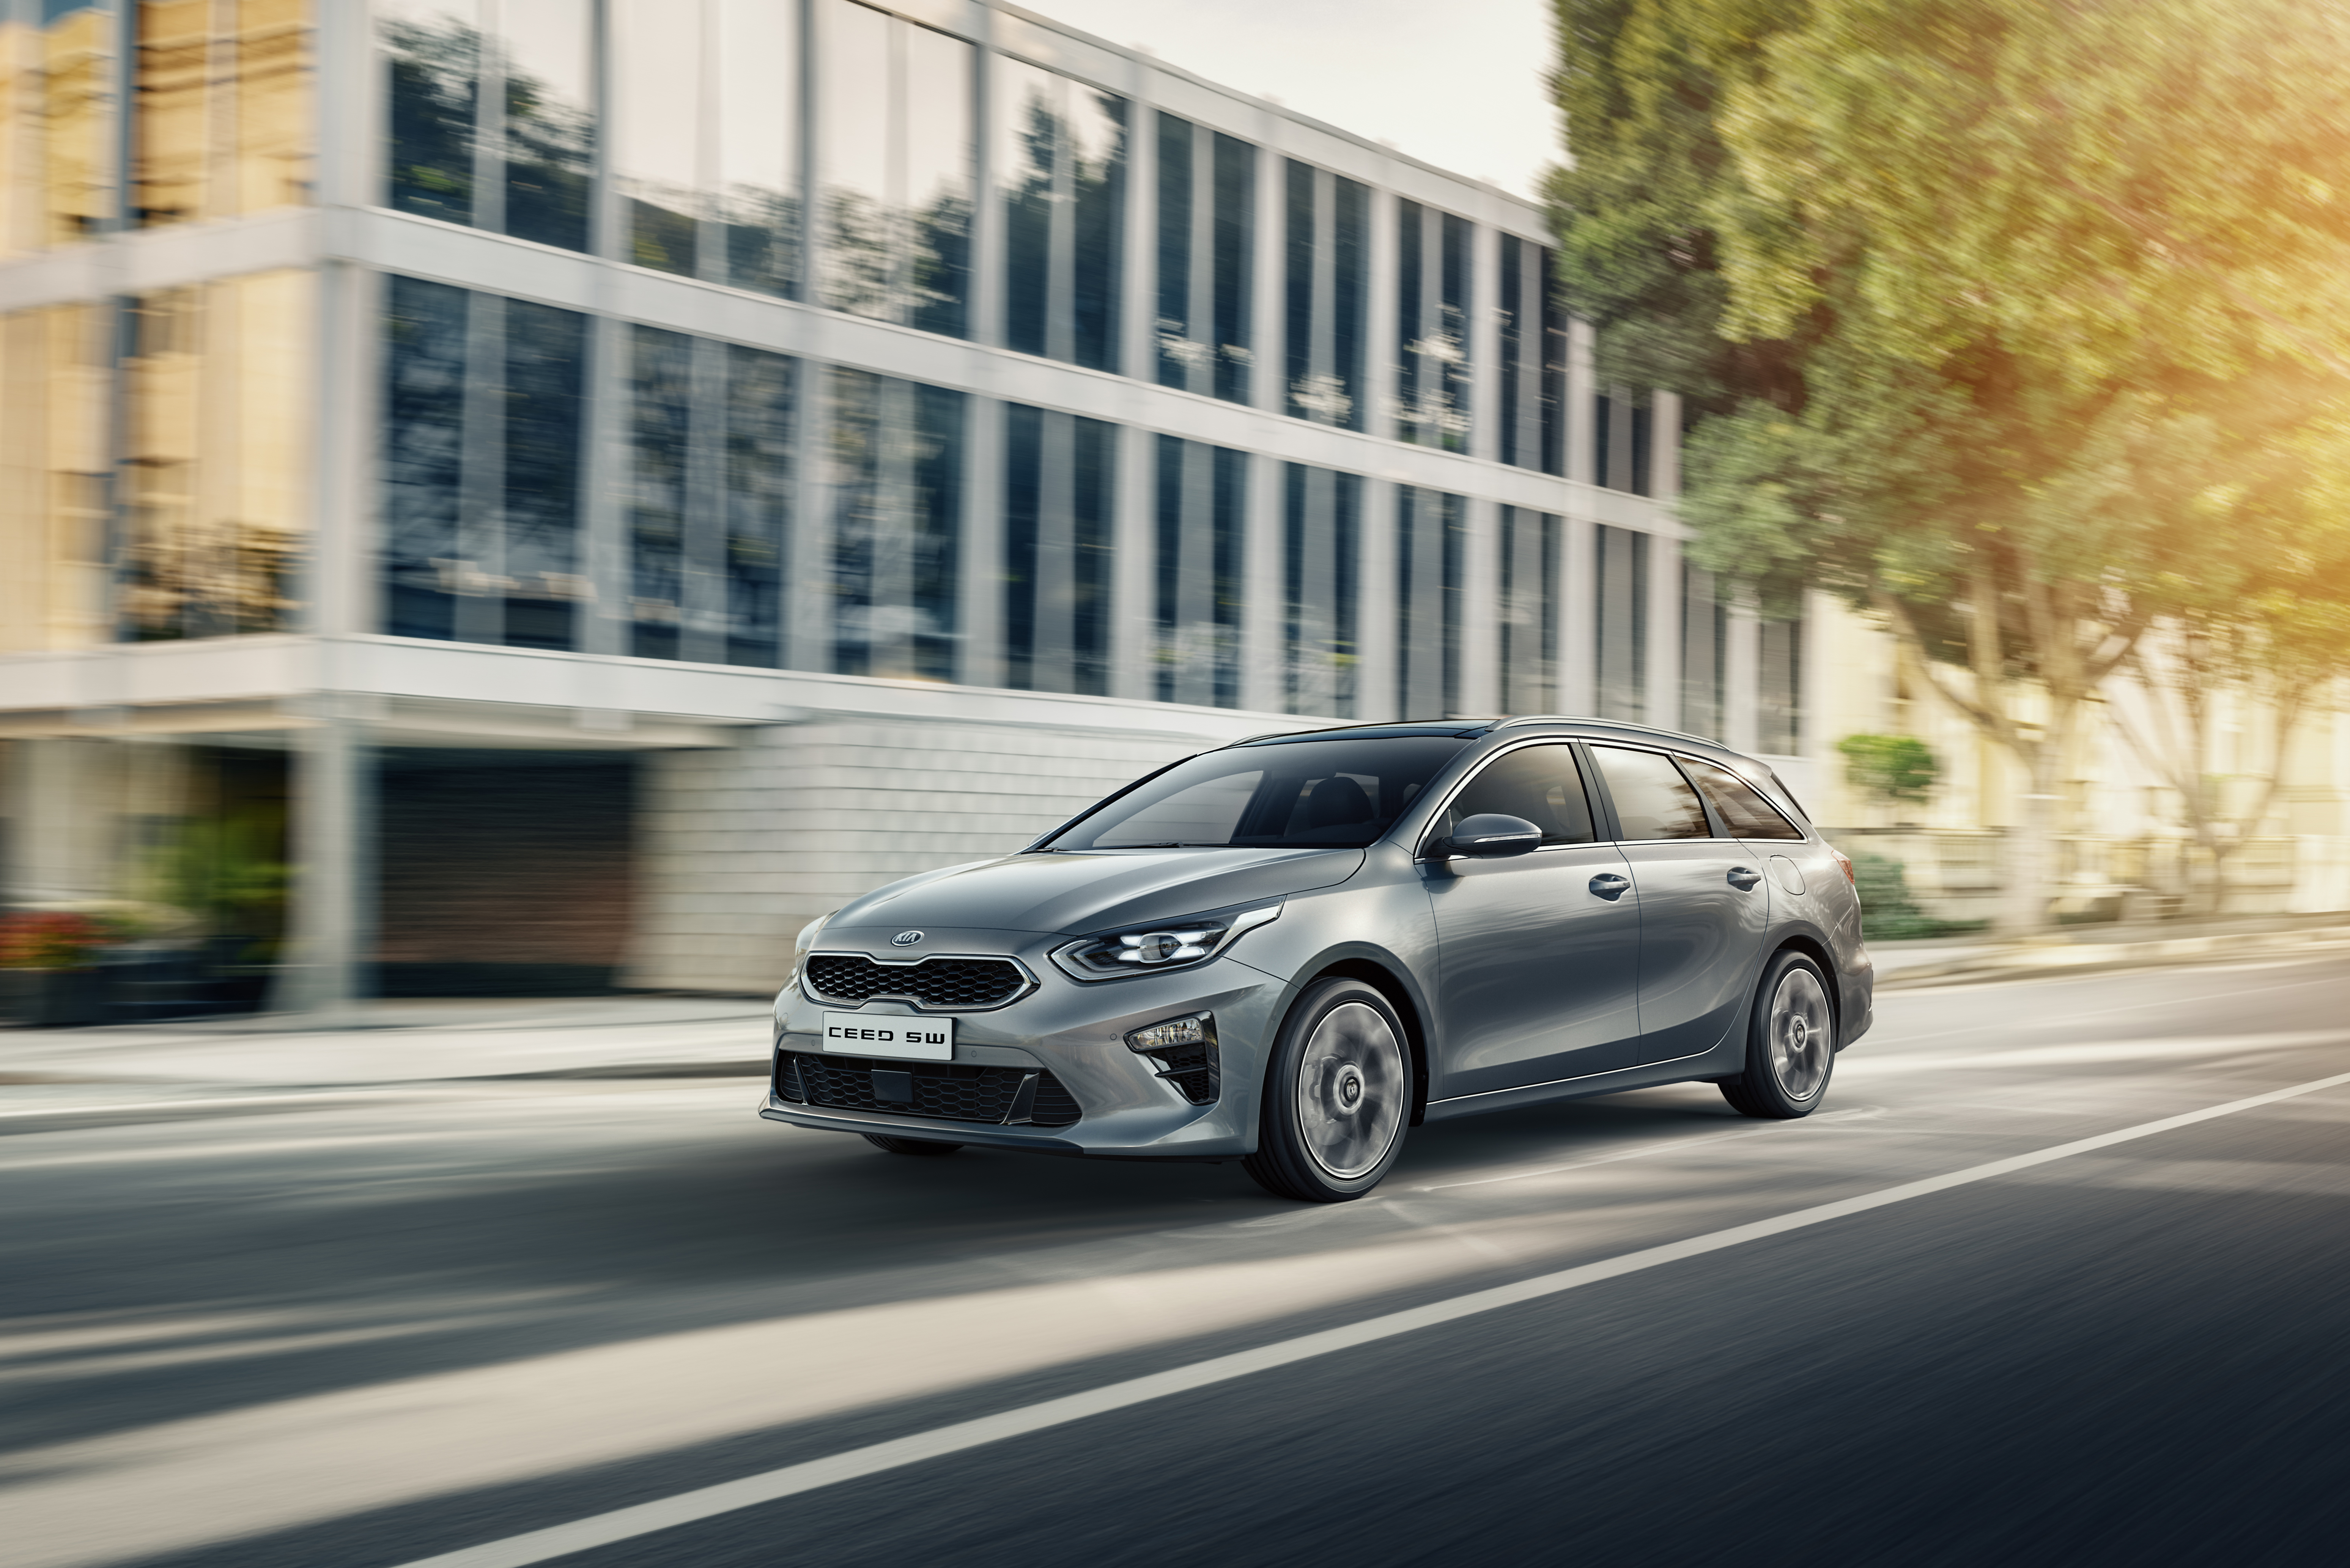 Kia To Launch PHEV Ceed in the Second Half of 2019